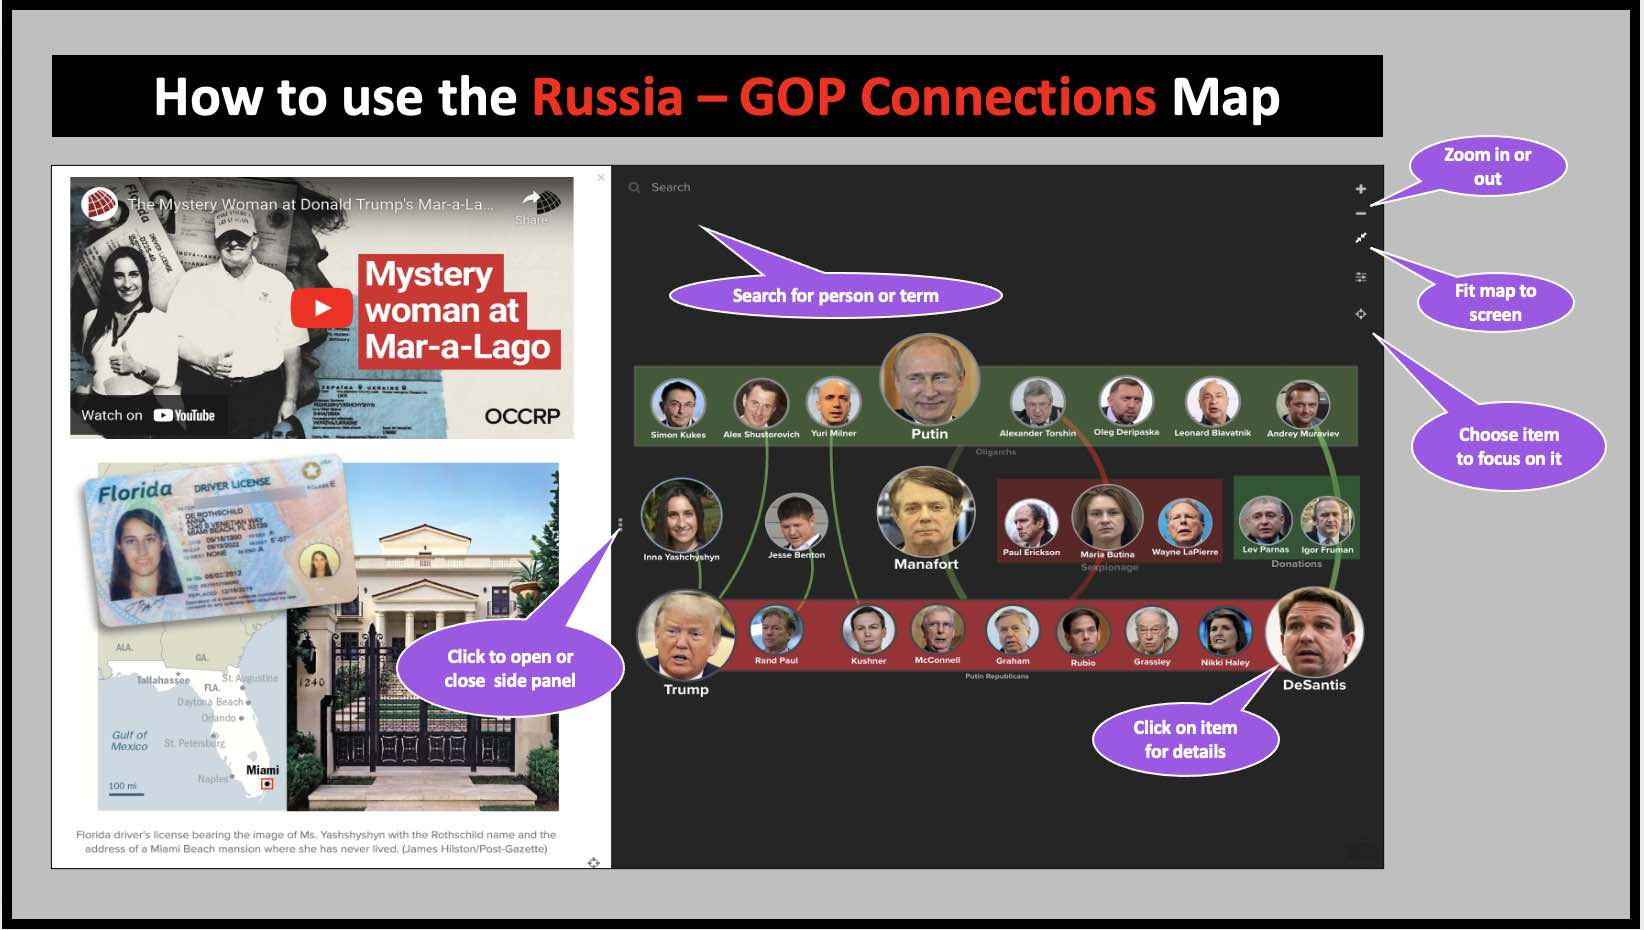 How to use the Russian - GOP connections map